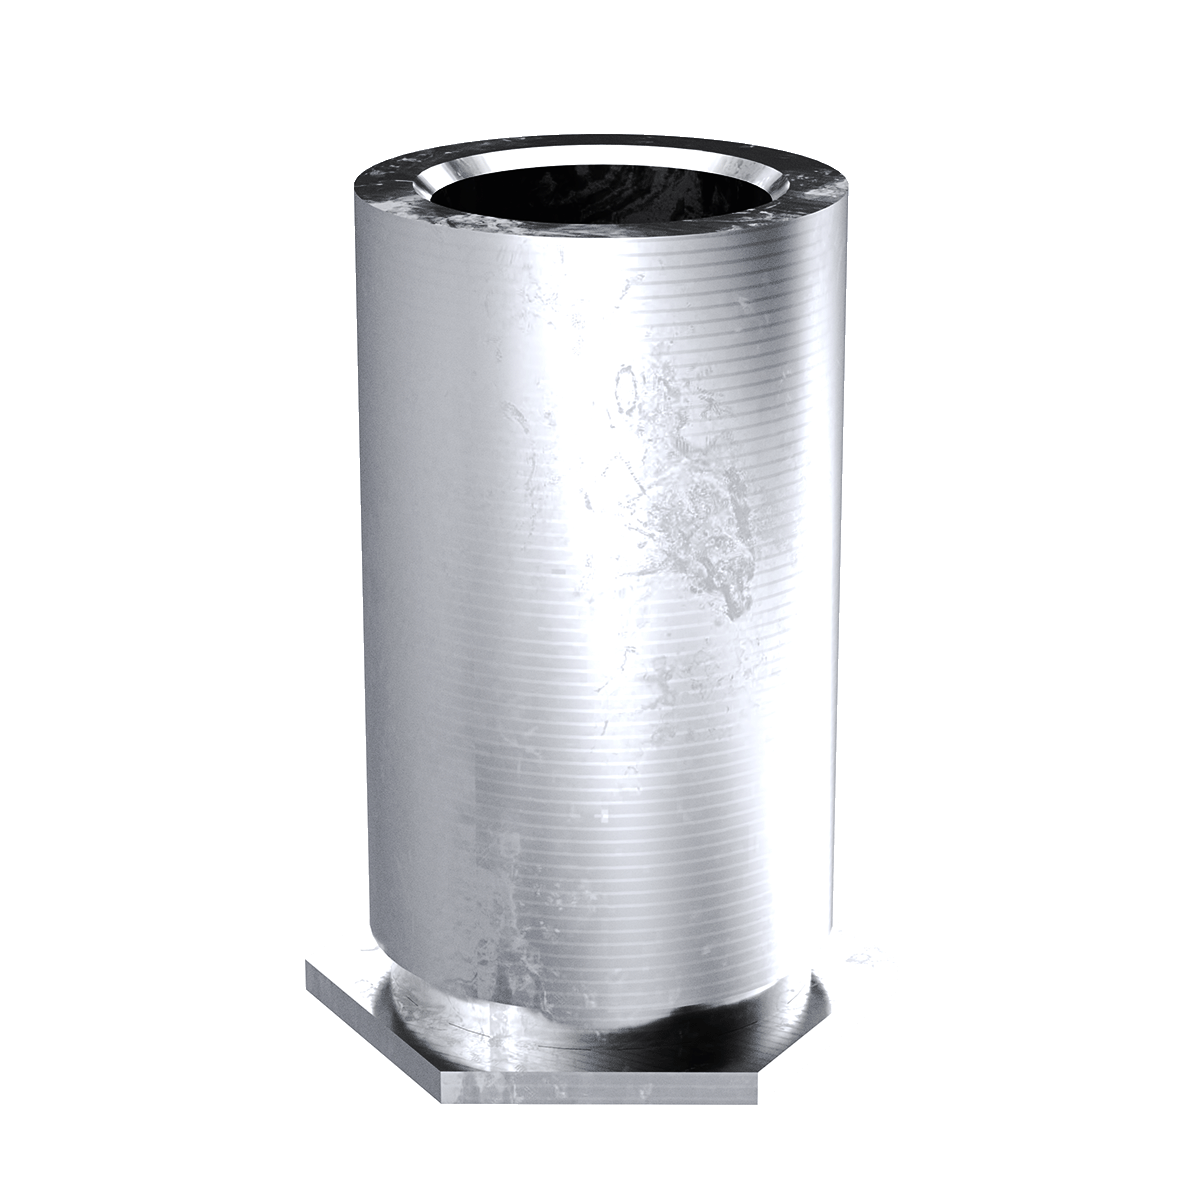 Self-Clinching Standoff, Through Unthreaded, 300 Series Stainless Steel, Passivated, 3.6 x 12, Hole Dia.: 5.4, 100 Pack